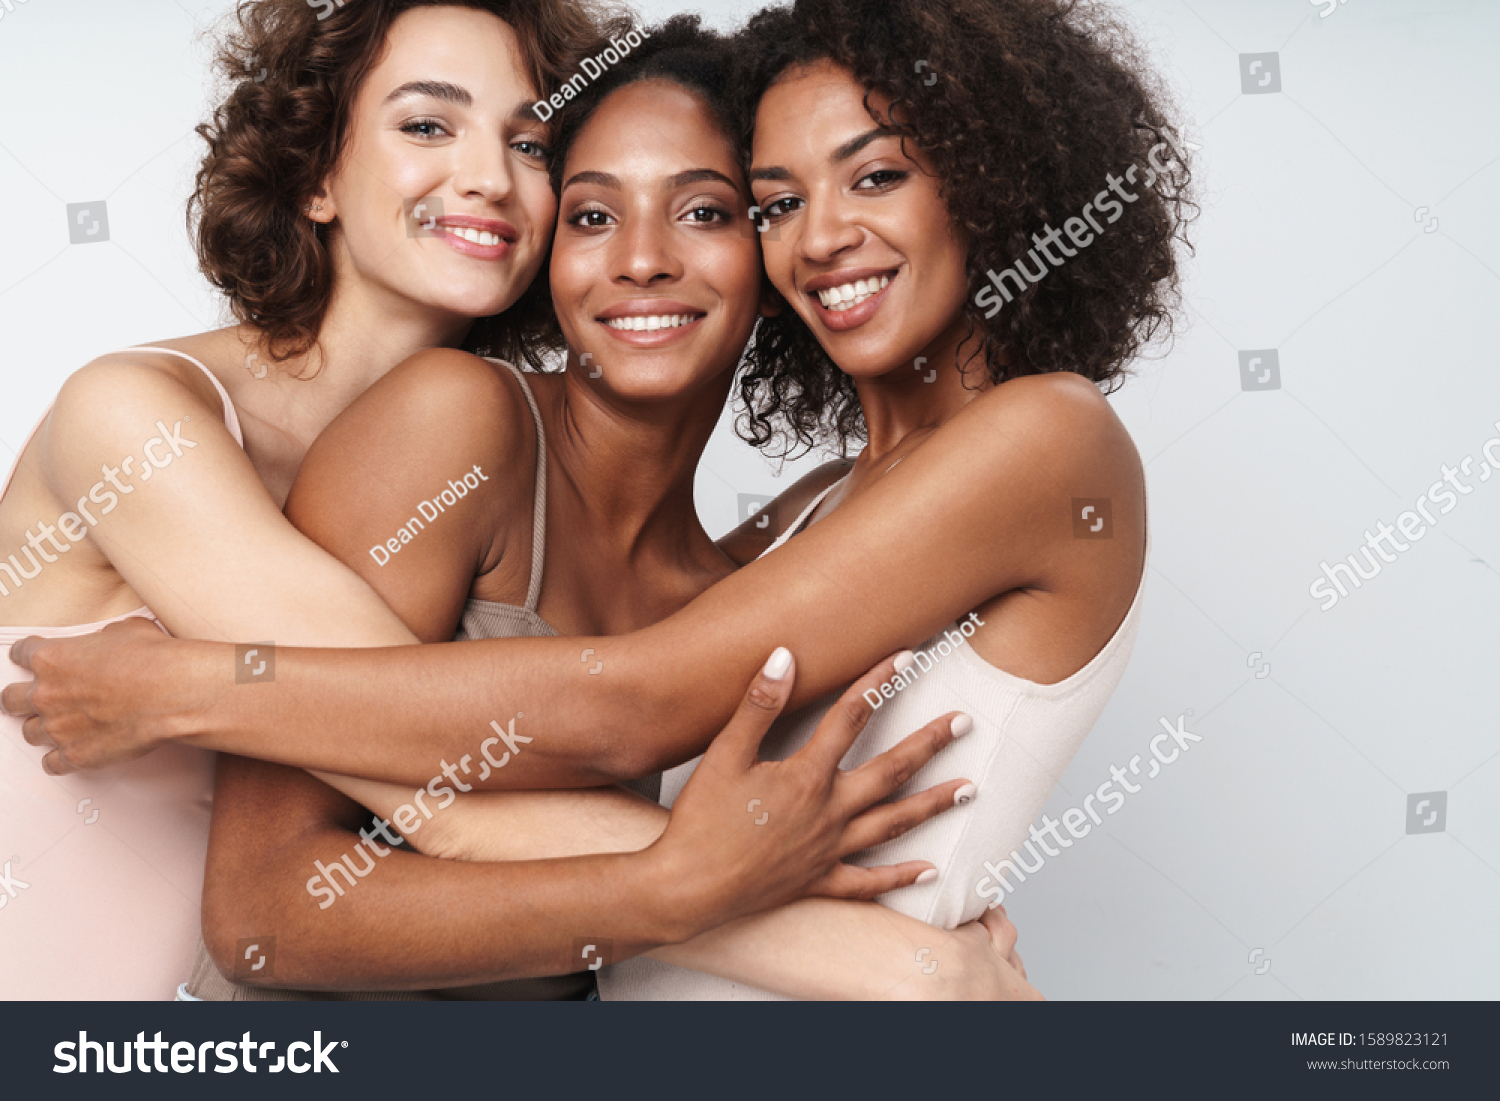 Portrait of three adorable multiethnic women smiling and hugging together isolated over white background #1589823121